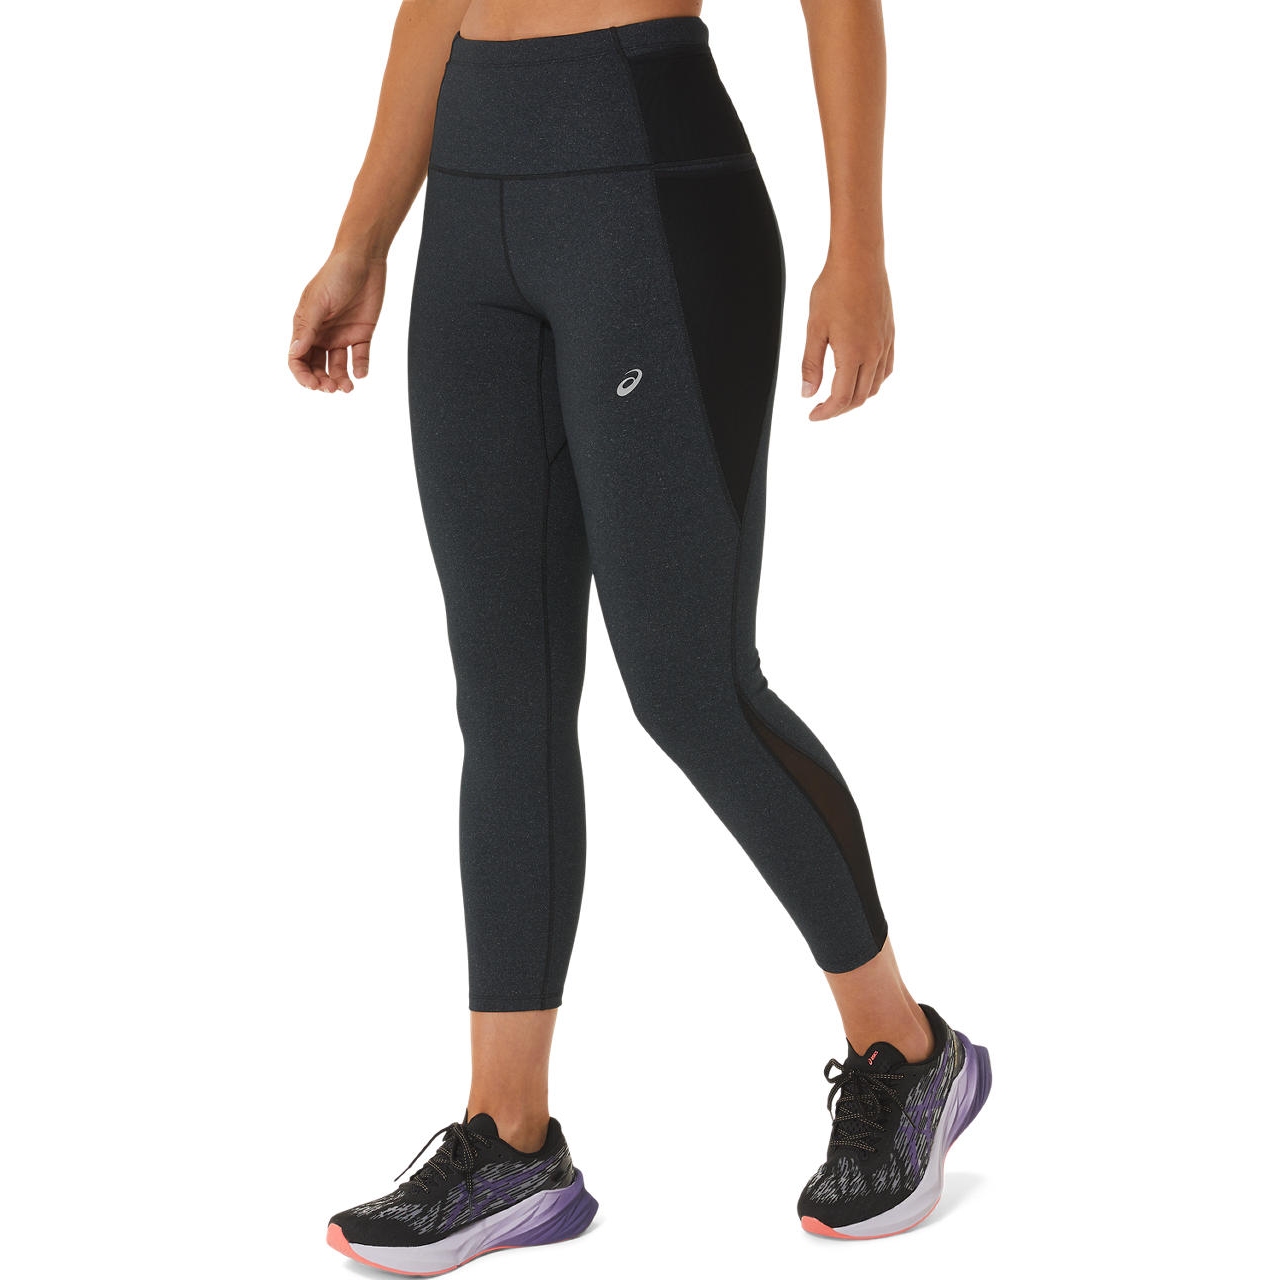 Asics Solid Women Grey Tights - Buy Asics Solid Women Grey Tights Online at  Best Prices in India | Flipkart.com